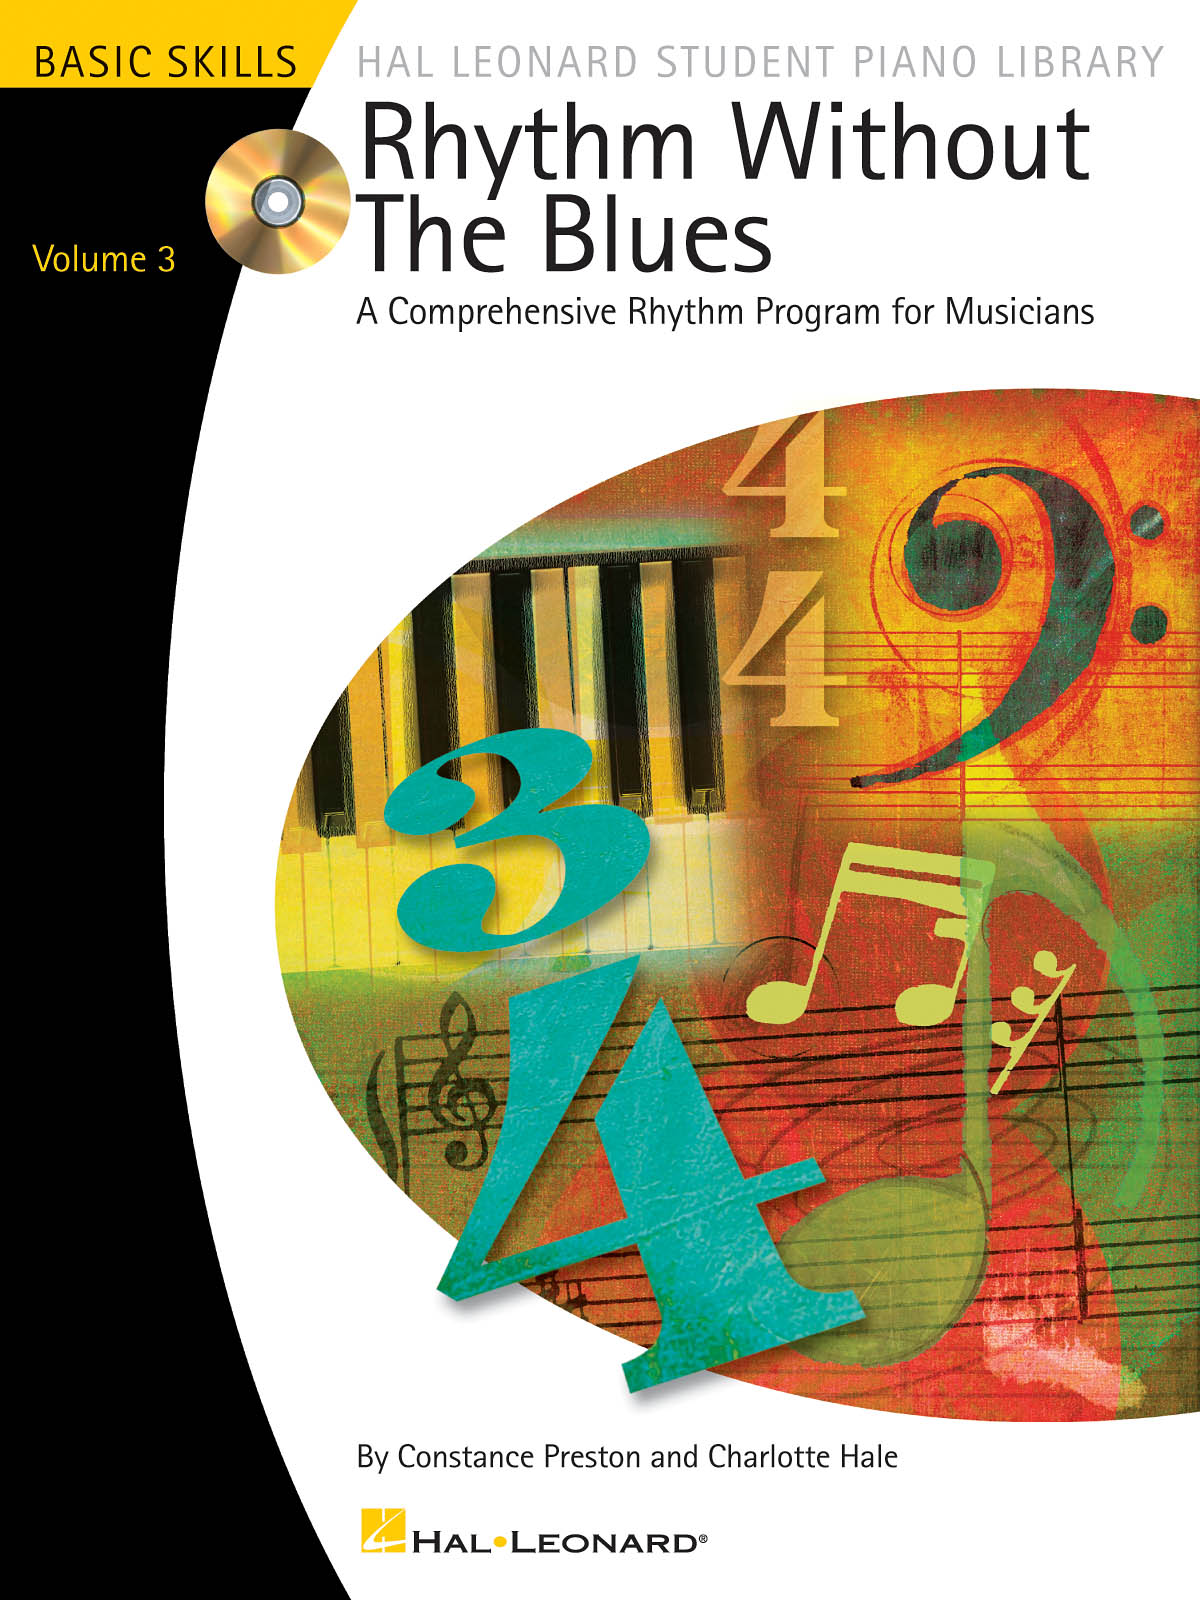 Rhythm Without the Blues - Volume 3: Reference Books: Theory